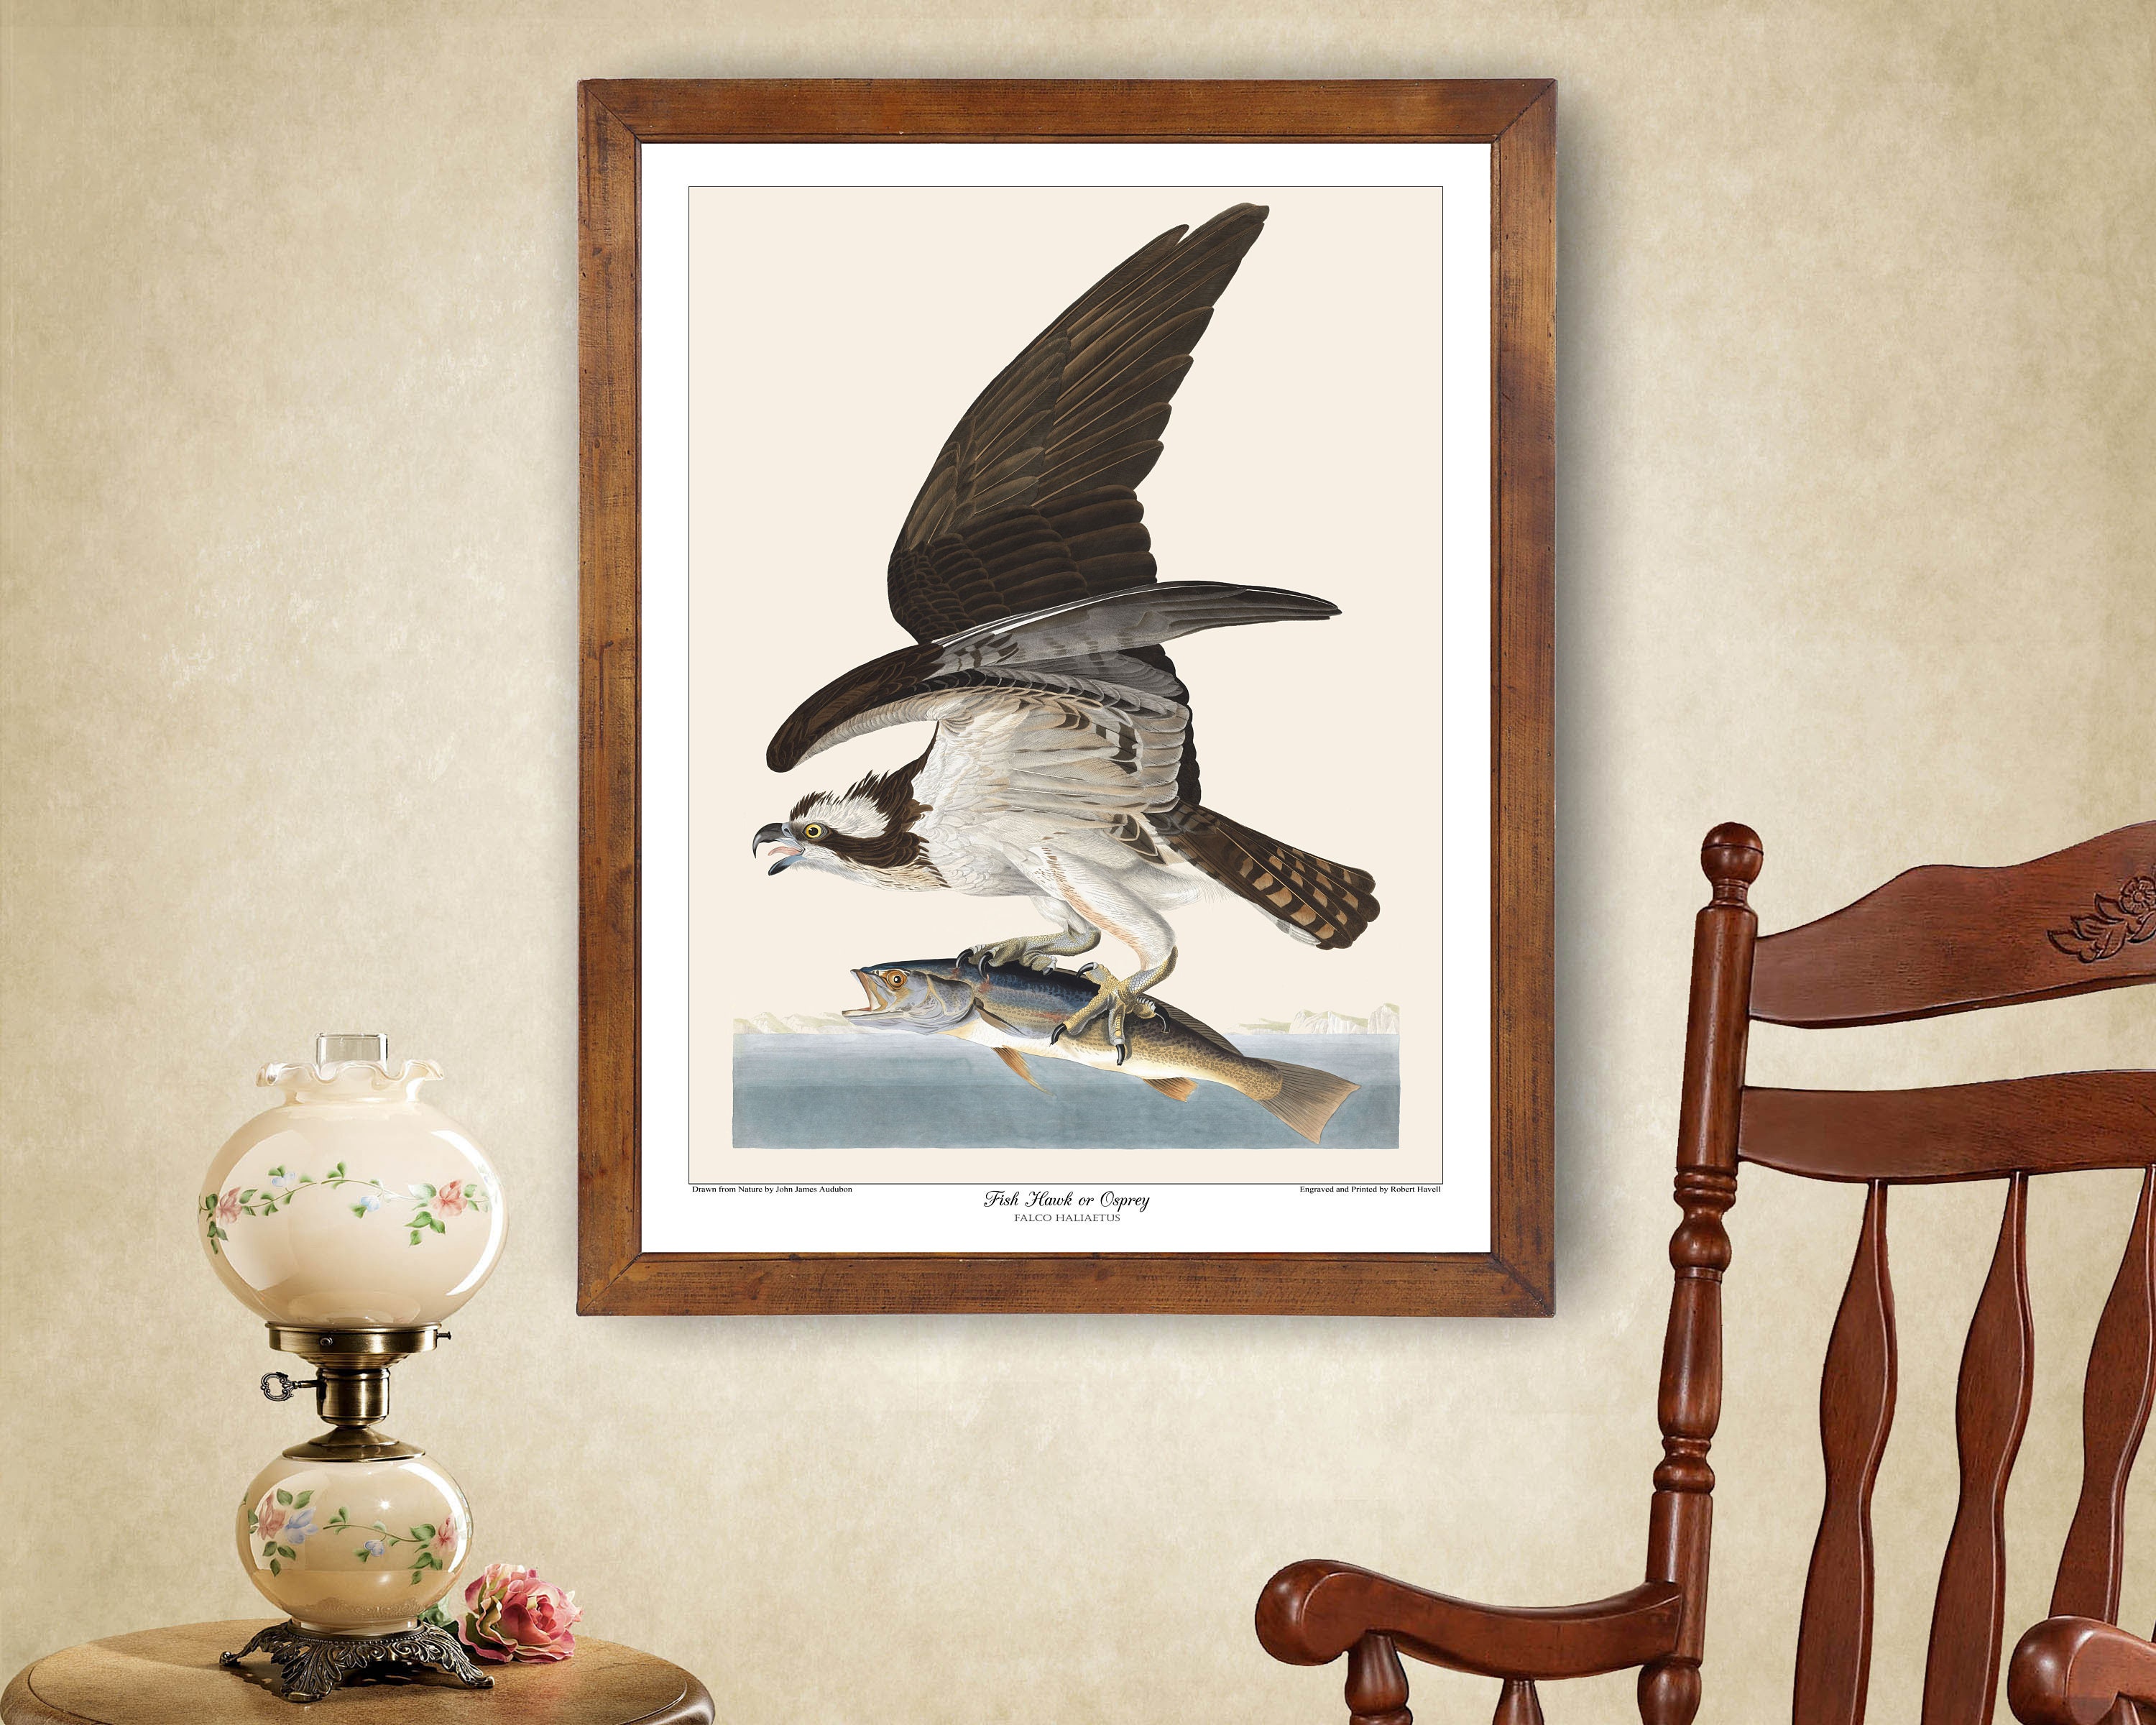 Fish Hawk or Osprey 24x36 Inch Print Based on a Vintage Painting